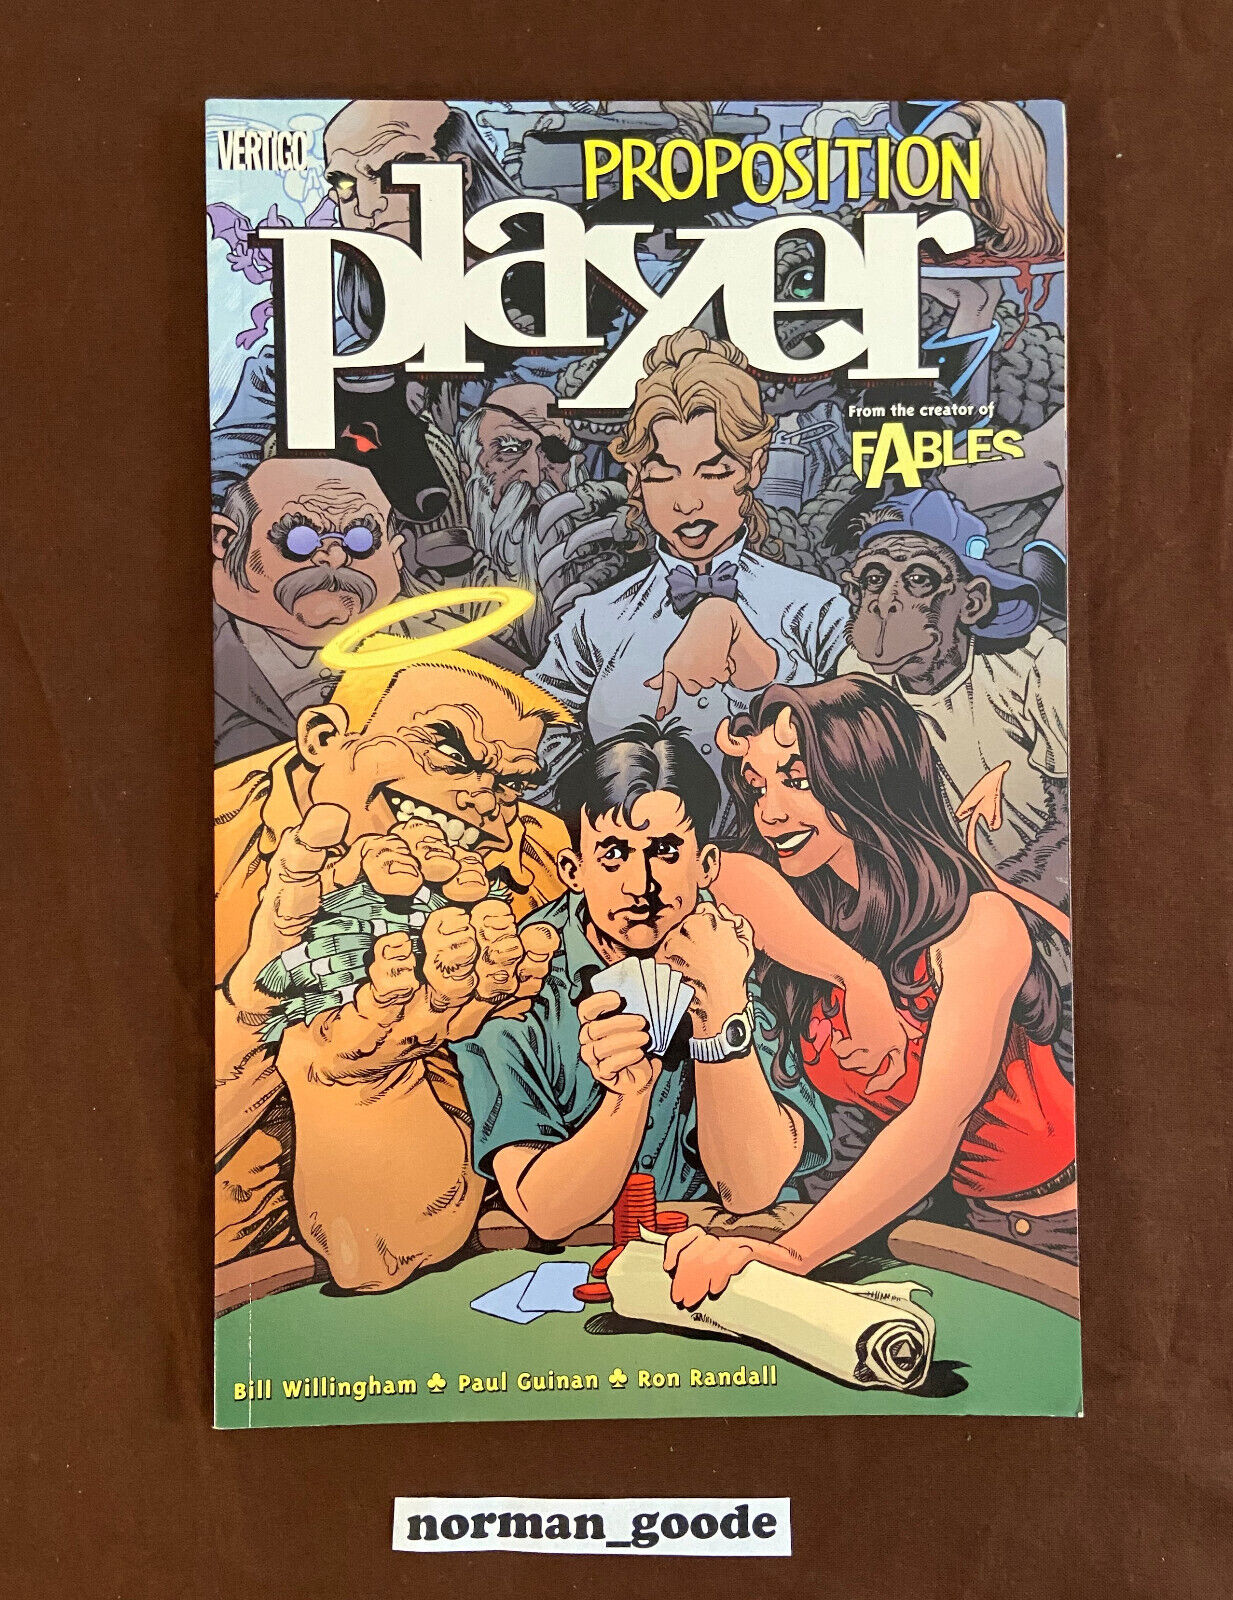 Proposition Player *NEW* Bill Willingham - Trade Paperback - Fables